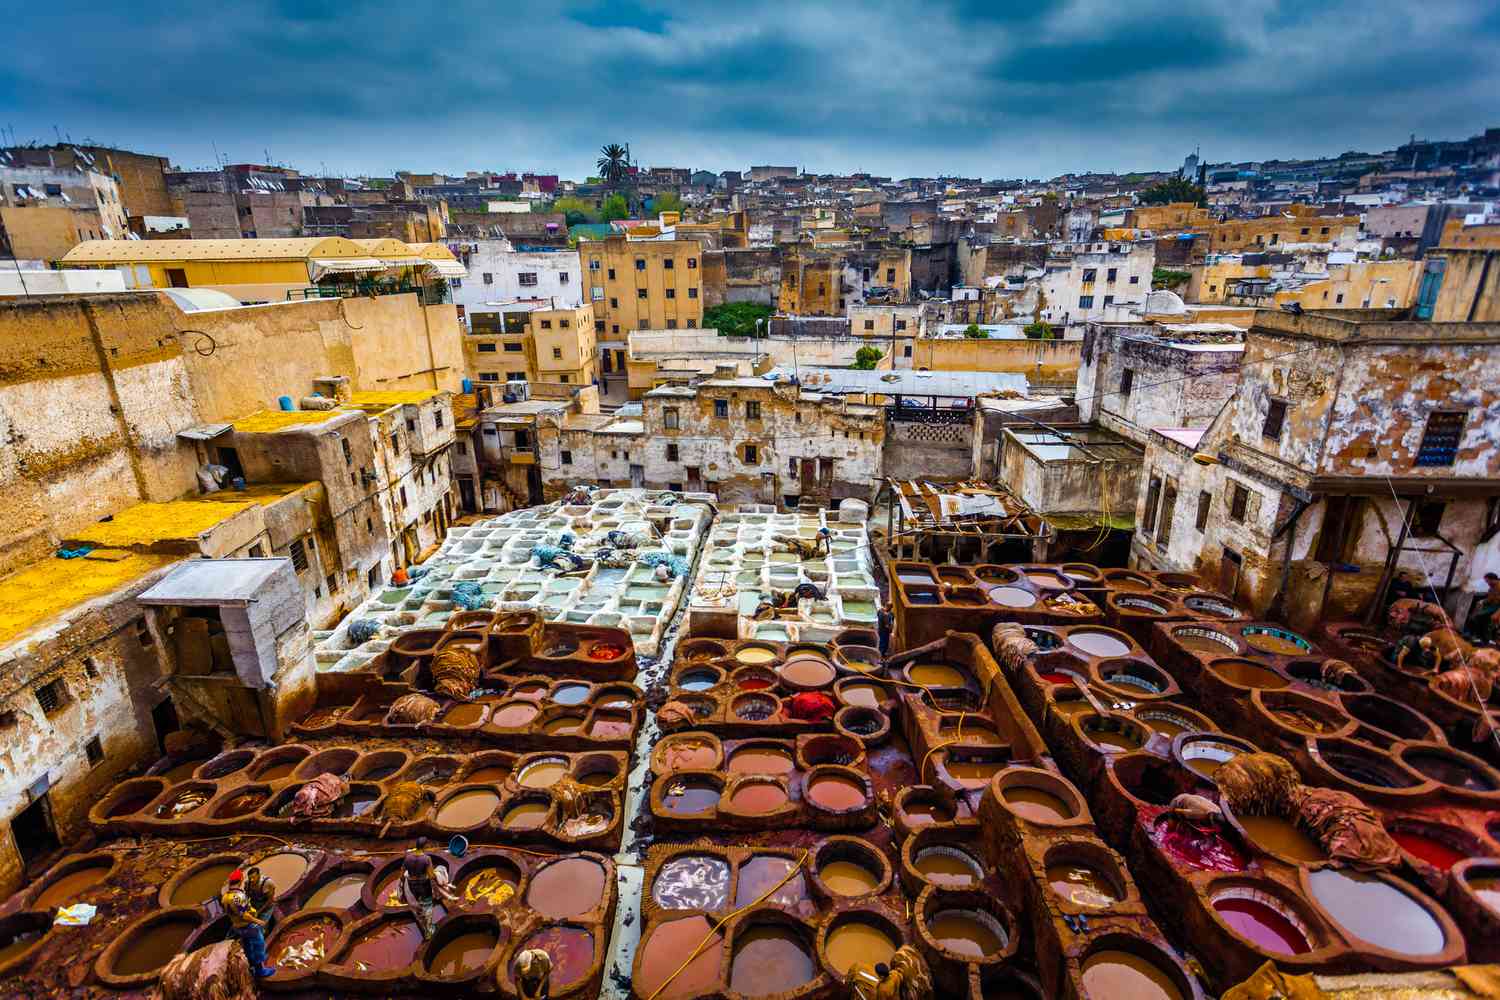 Fez: Morocco Historic City with the World’s Oldest Campus